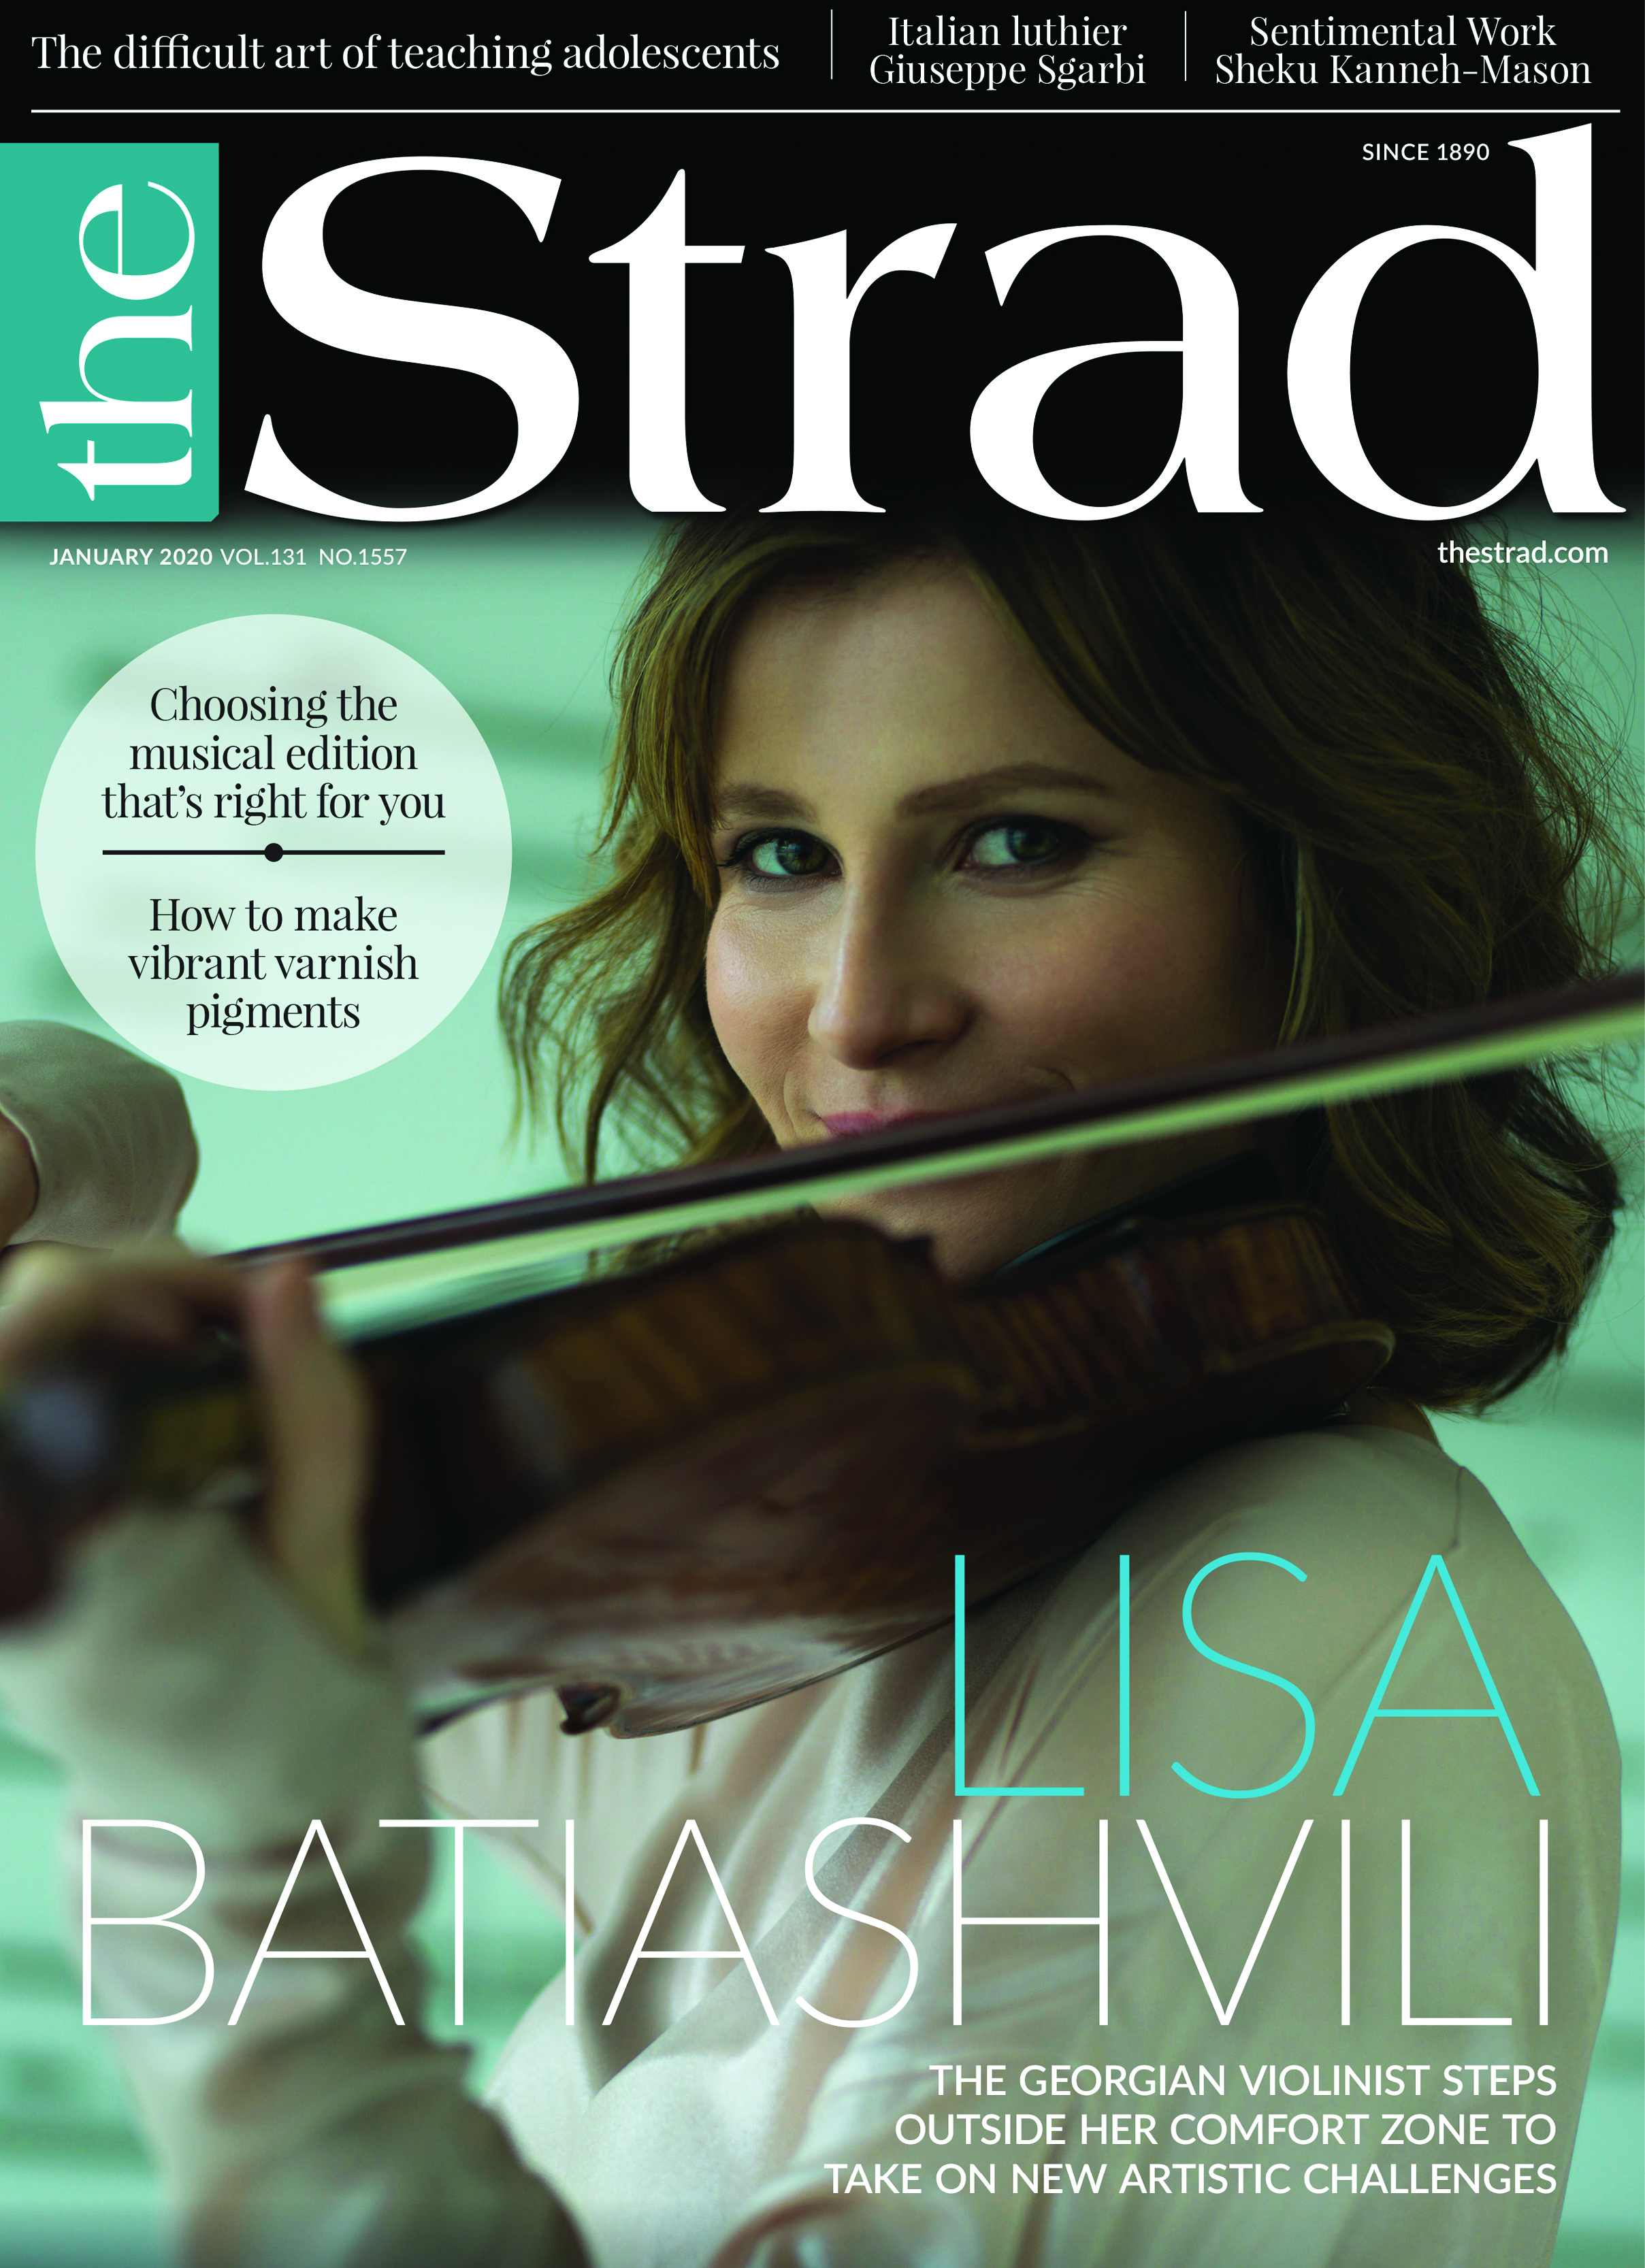 Lisa Batiashvili: The Georgian violinist steps outside her comfort zone to take on new artistic challenges | January 2020 issue | The Strad